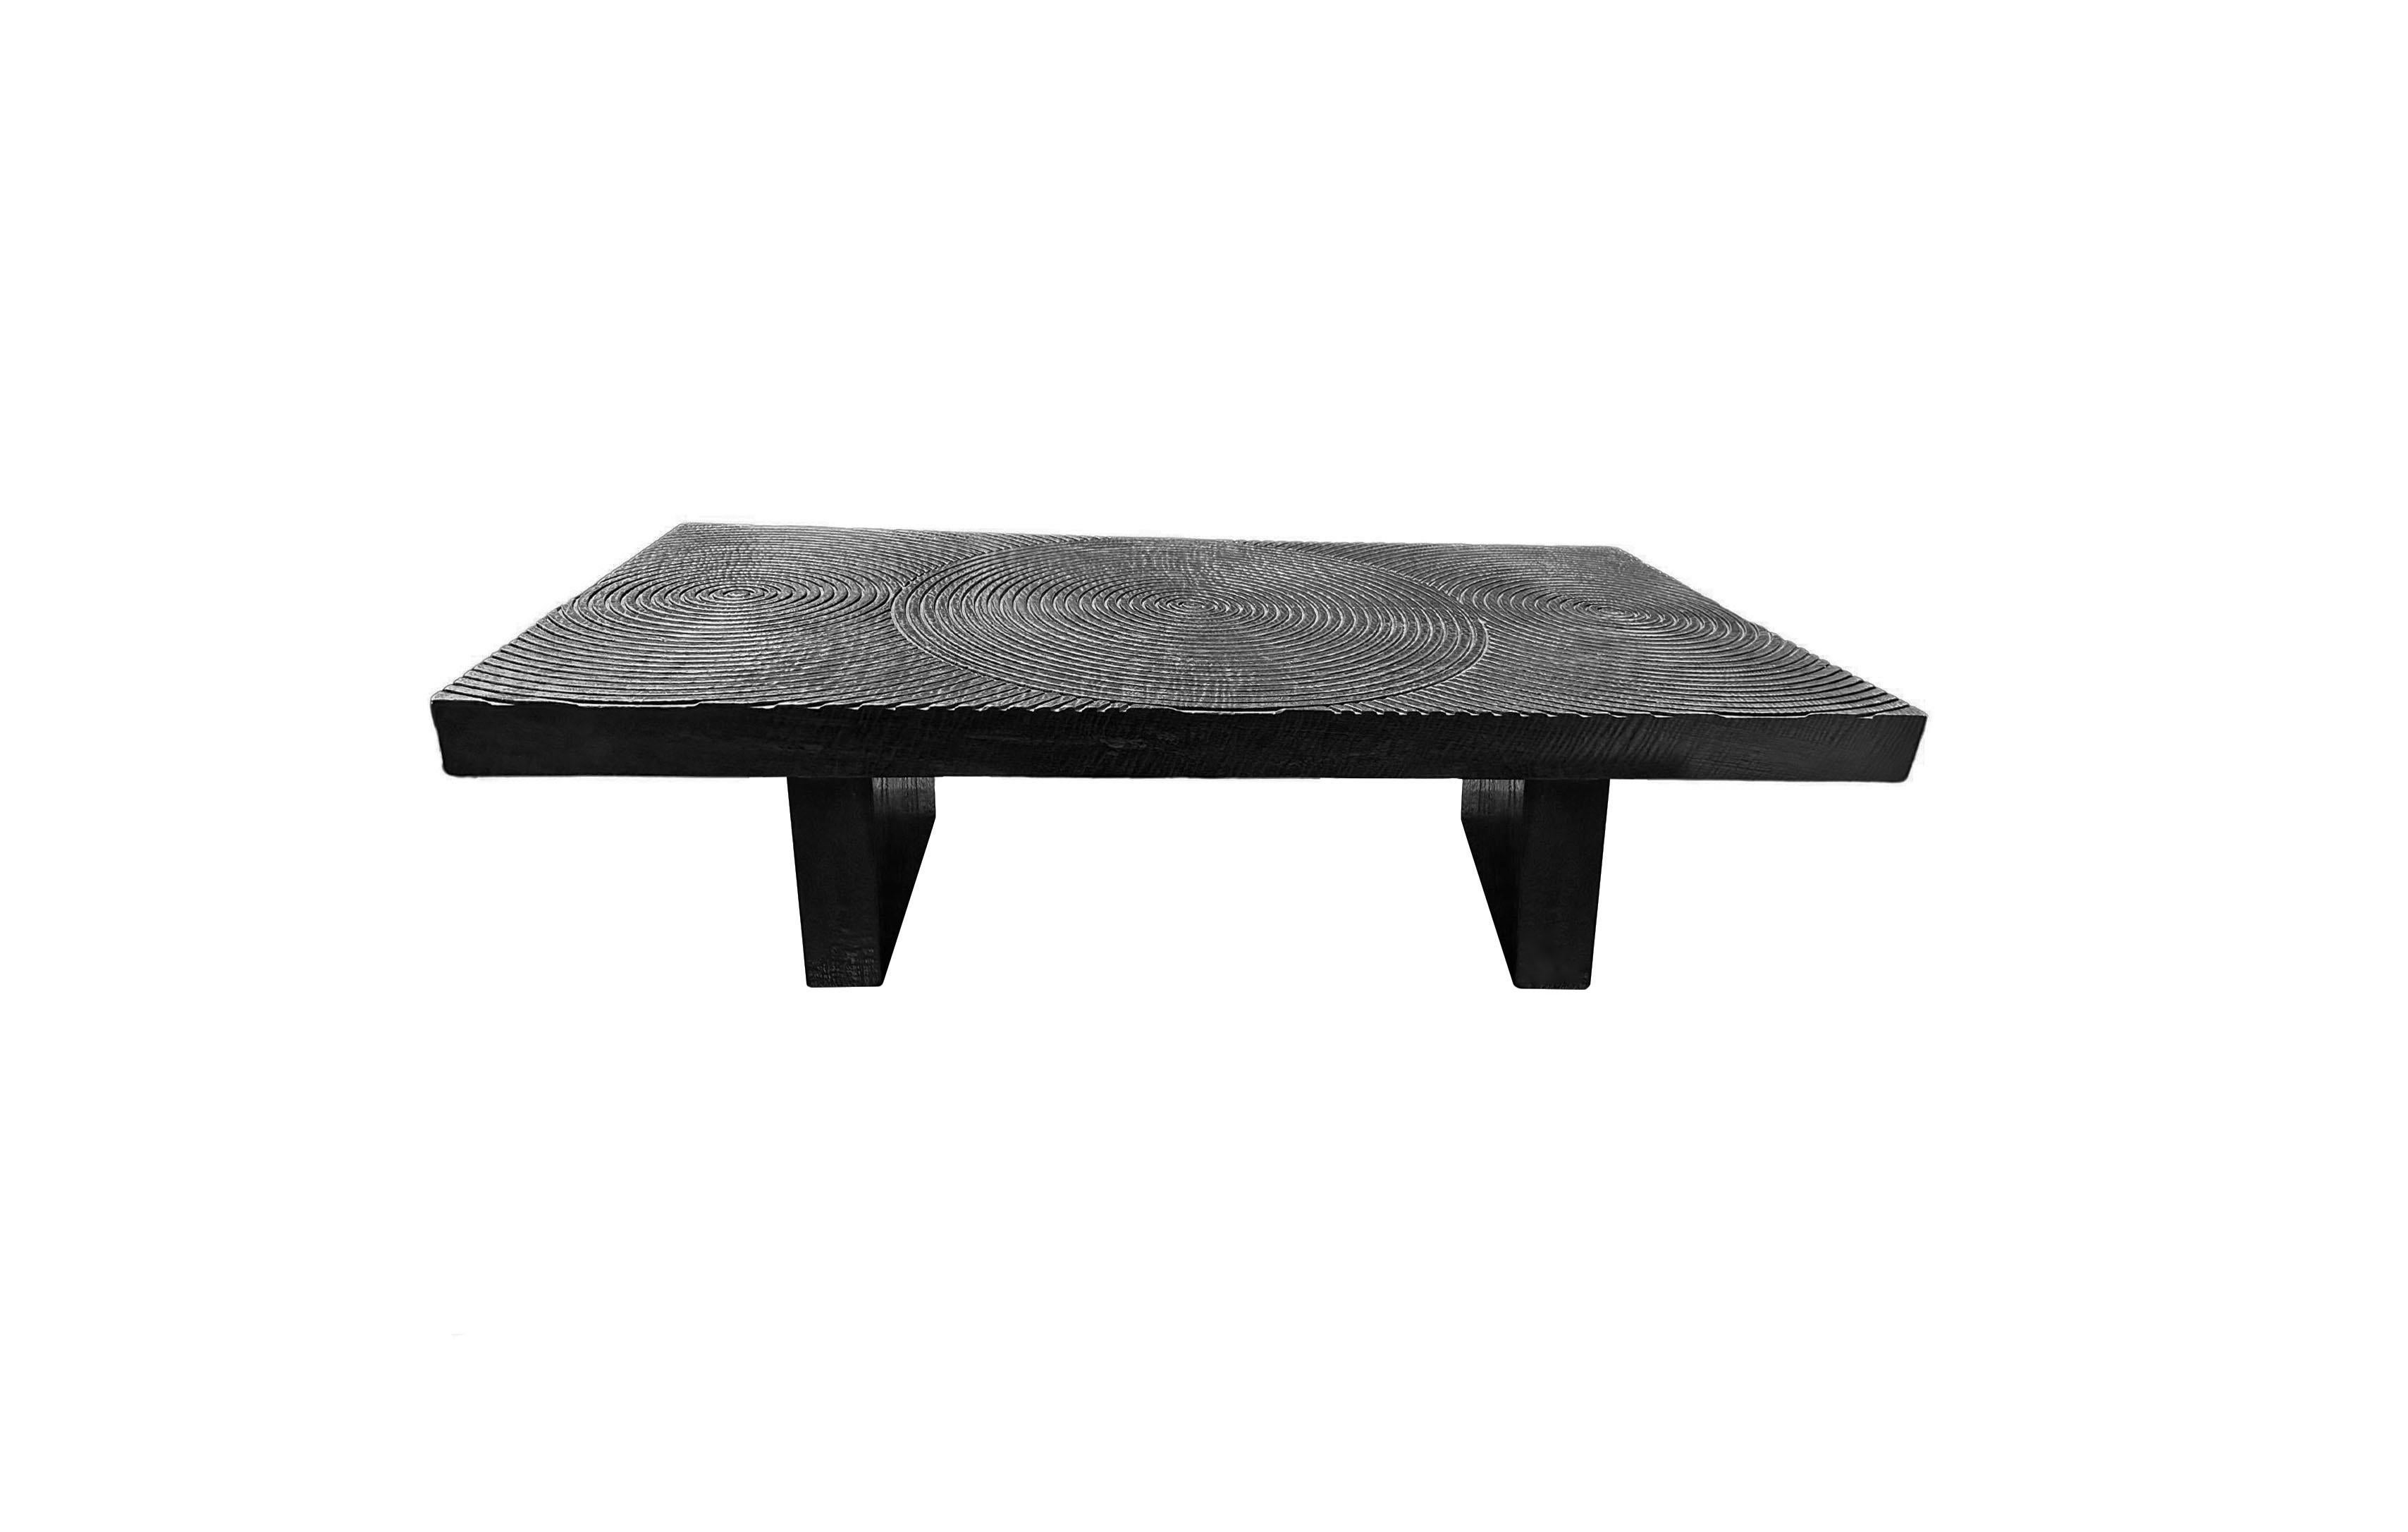 Solid Sculptural Mango Wood Table, Burnt Finish, Modern Organic For Sale